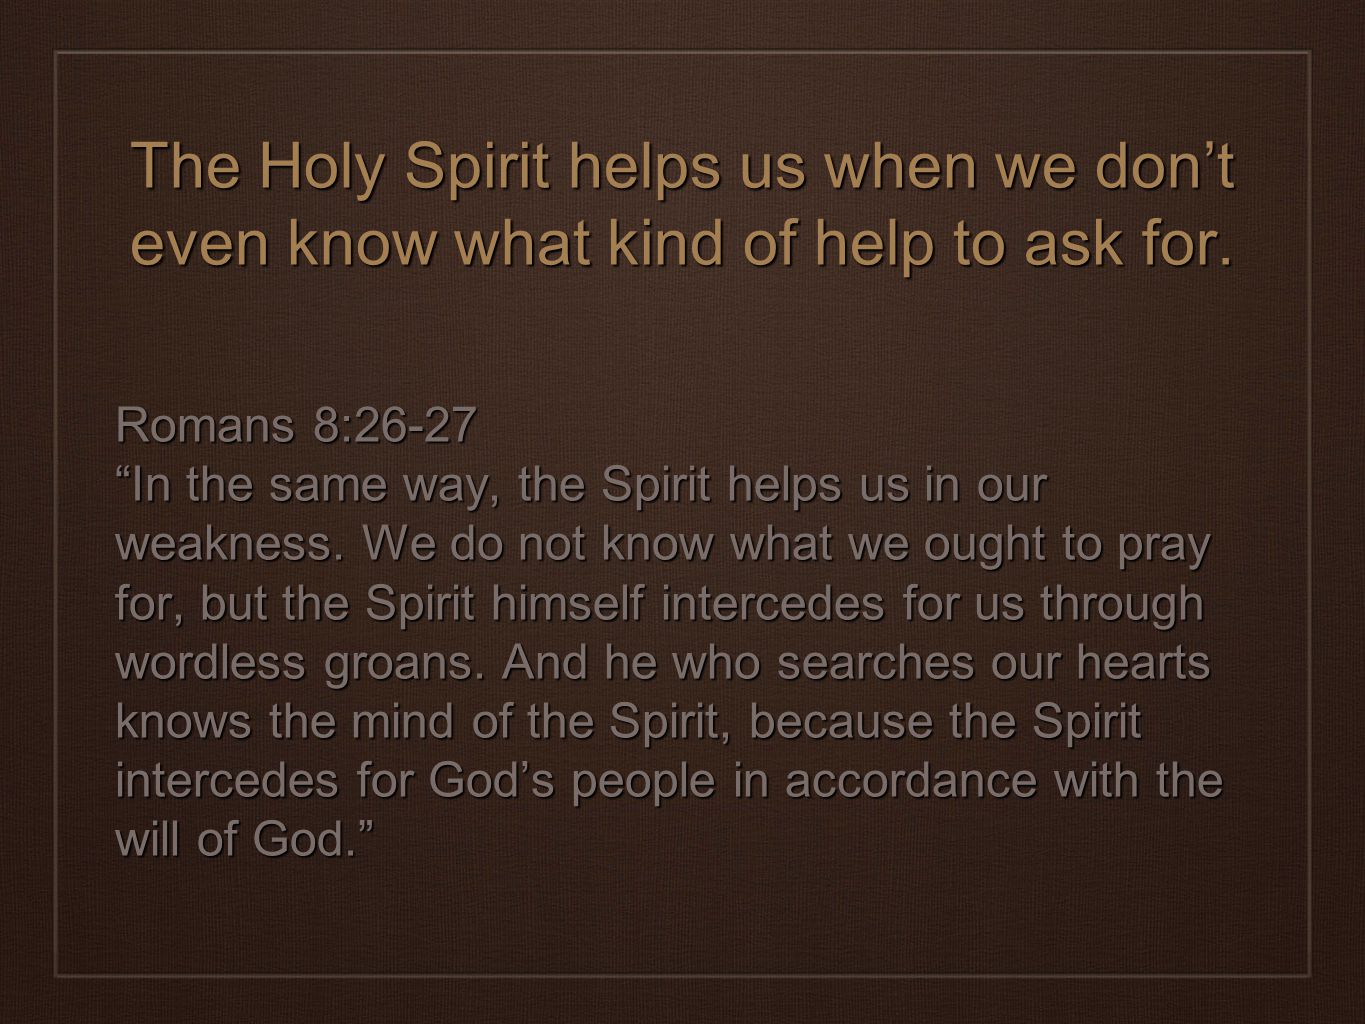 The Holy Spirit helps us when we don’t even know what kind of help to ask for.